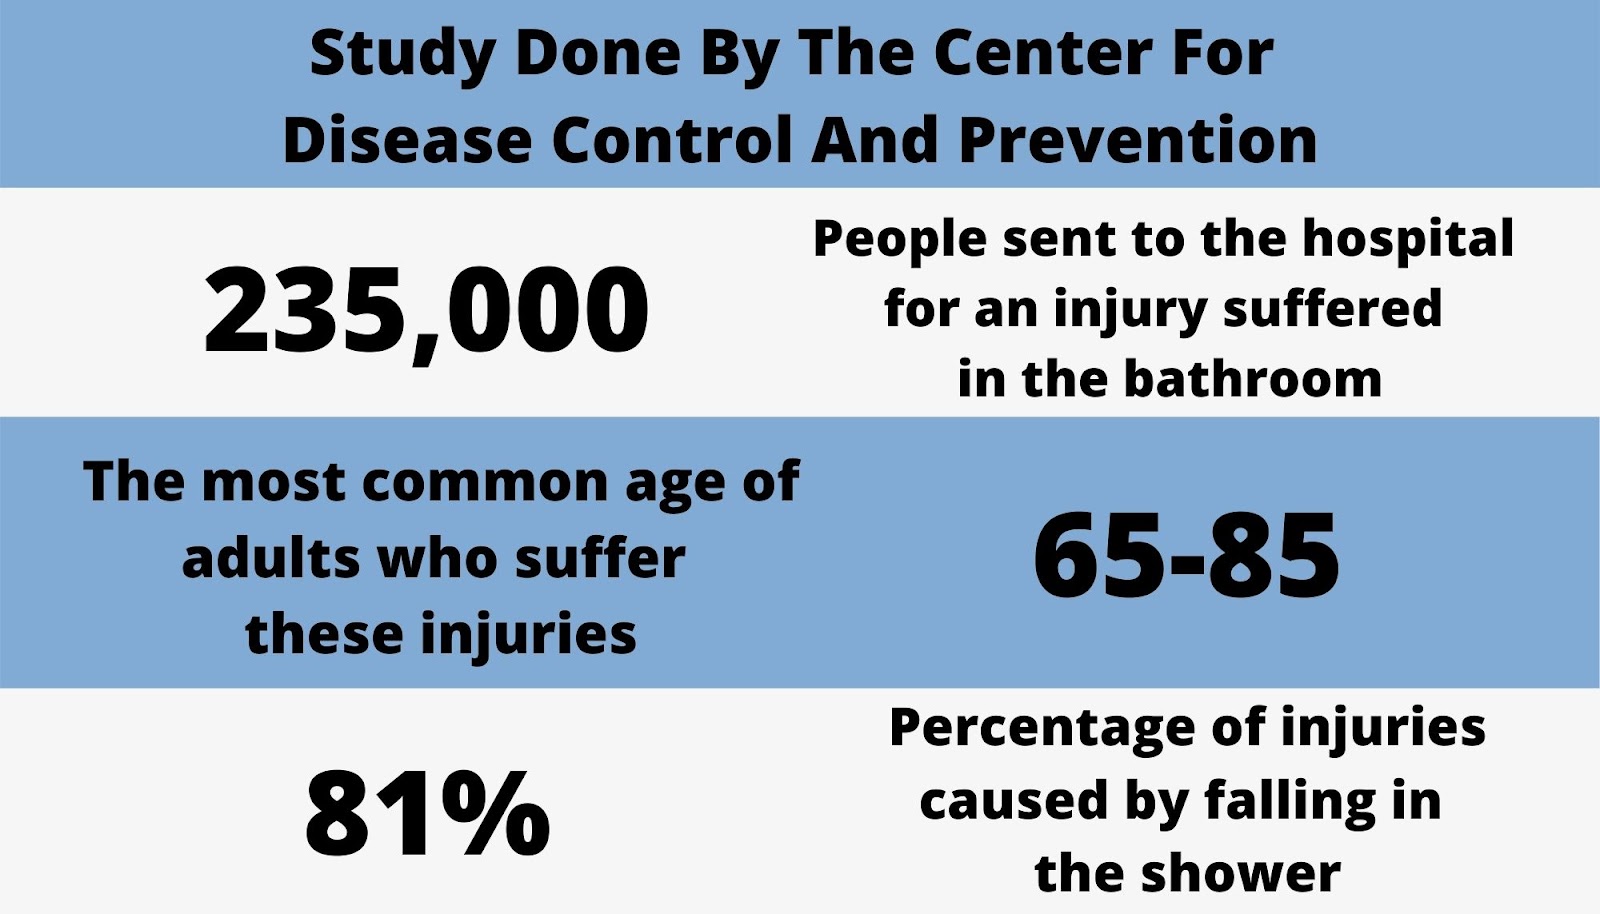 Study Done by the Center for Disease Control and Prevention